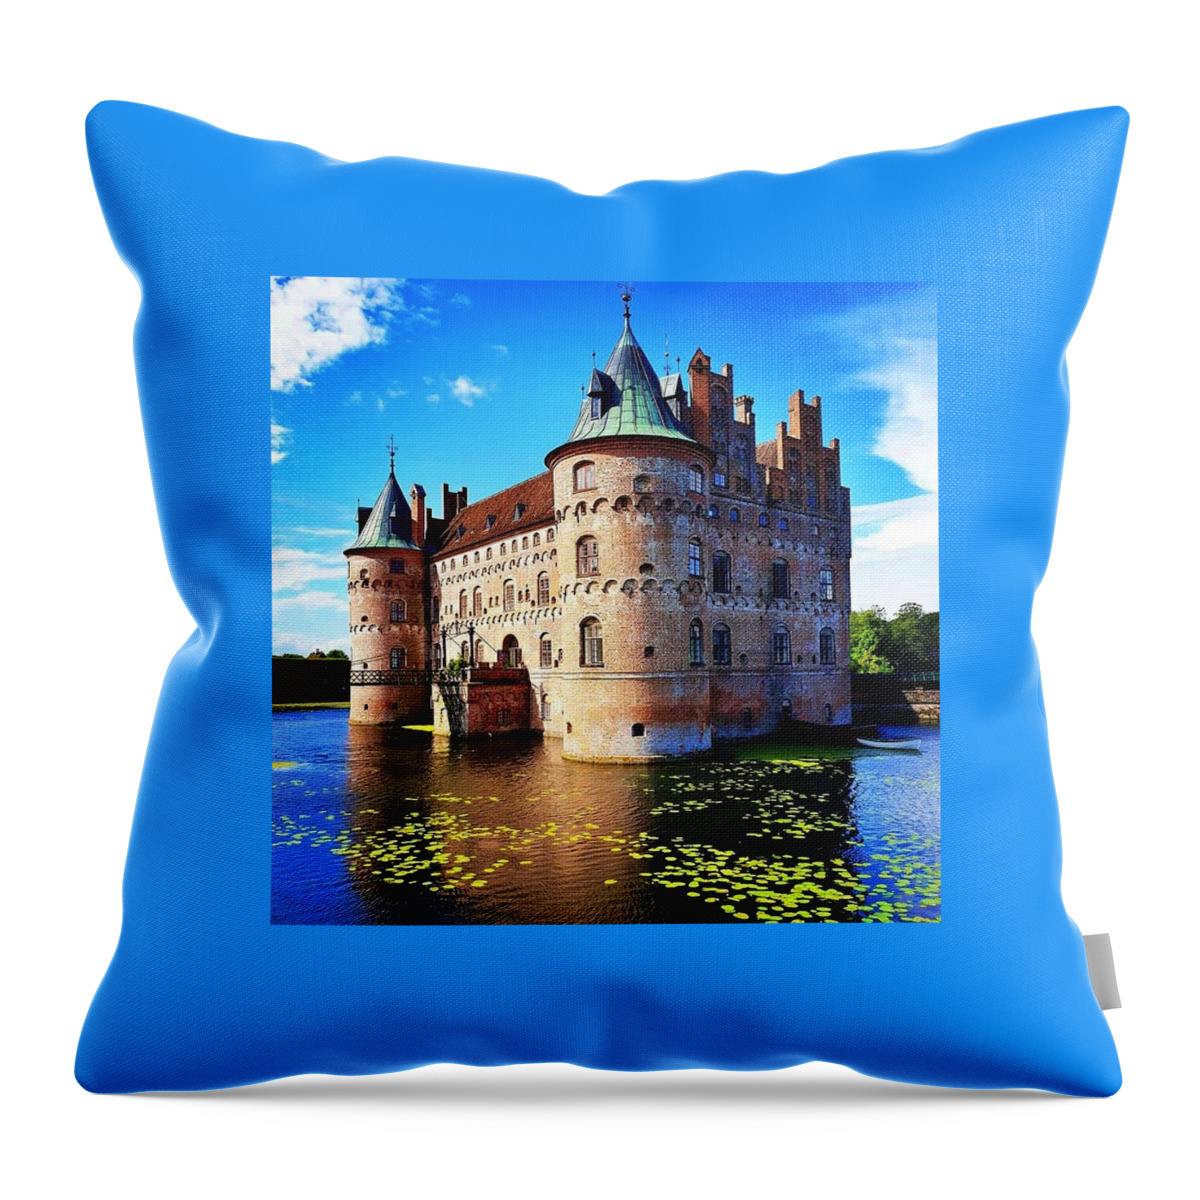 Castle Throw Pillow featuring the photograph Floating Castle by Andrea Whitaker